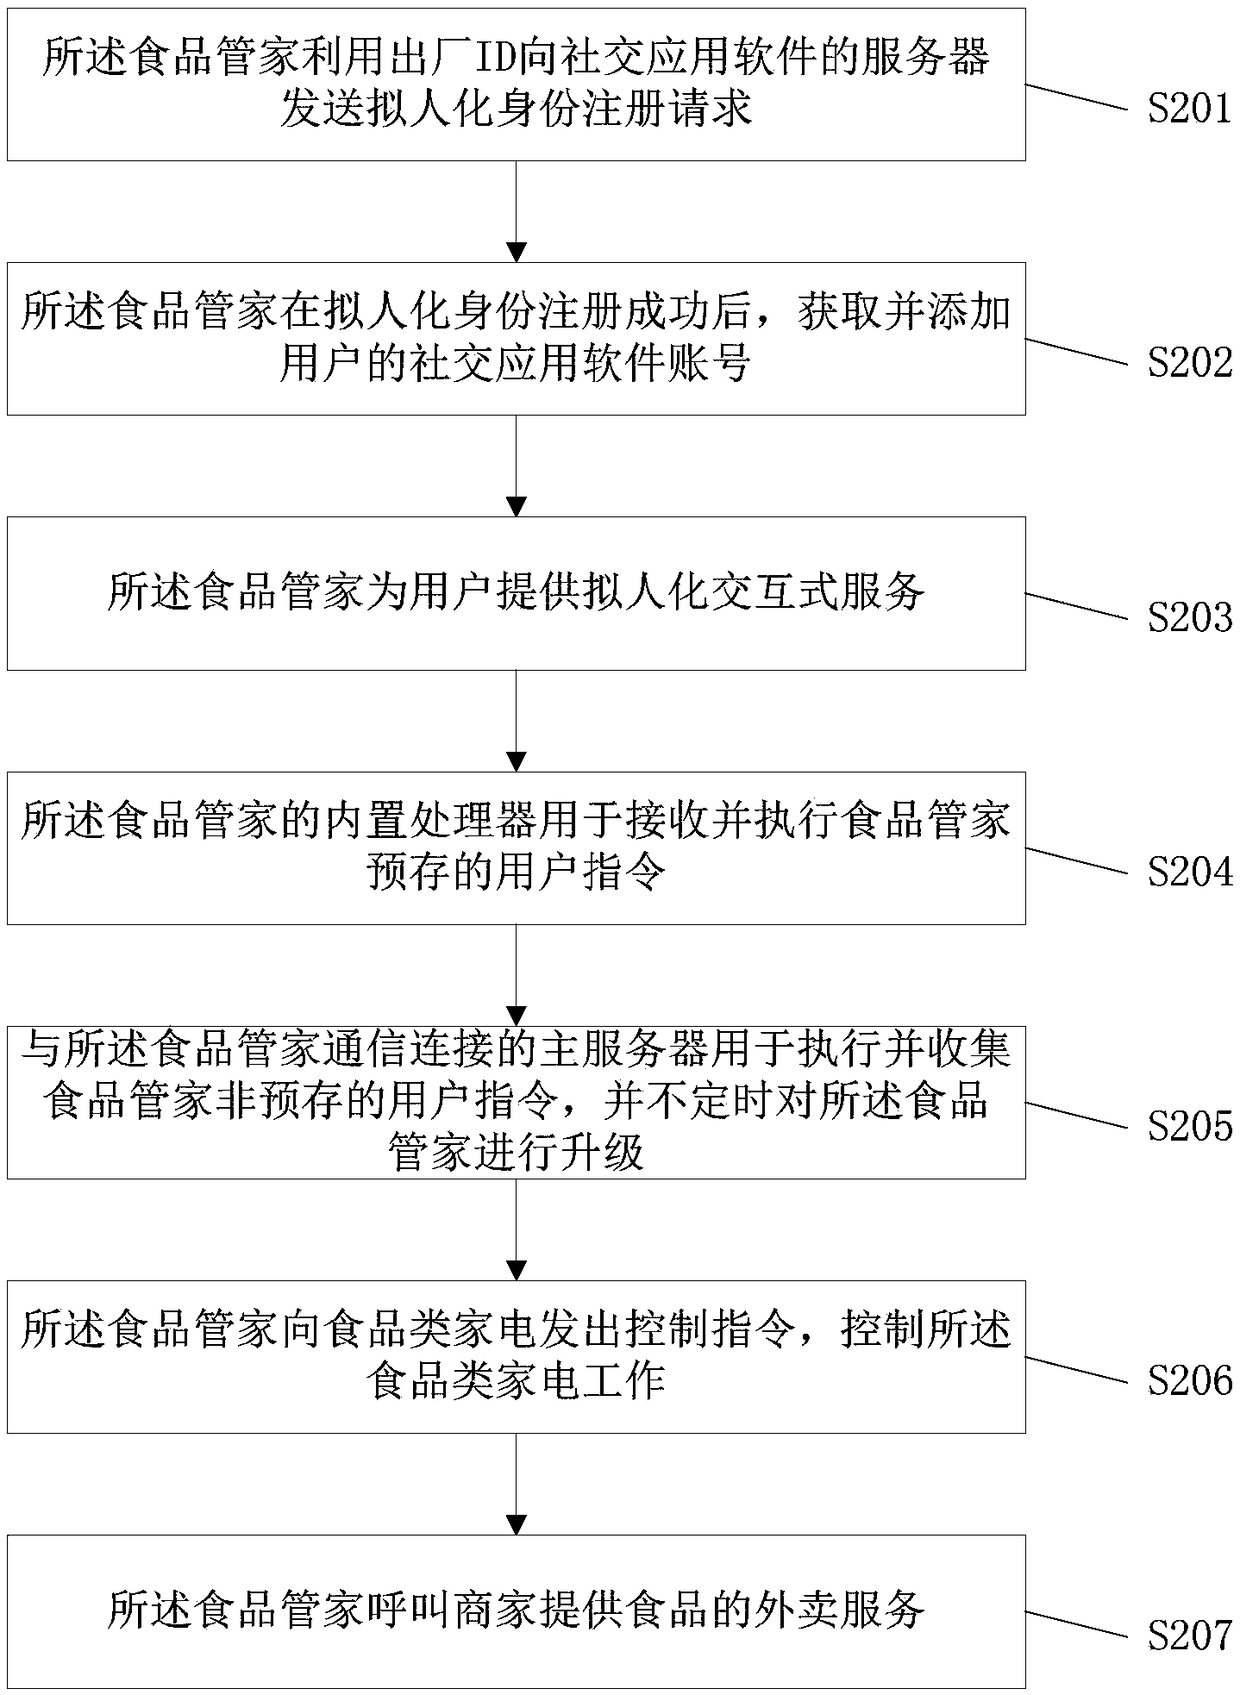 Food steward intelligent interaction system and method